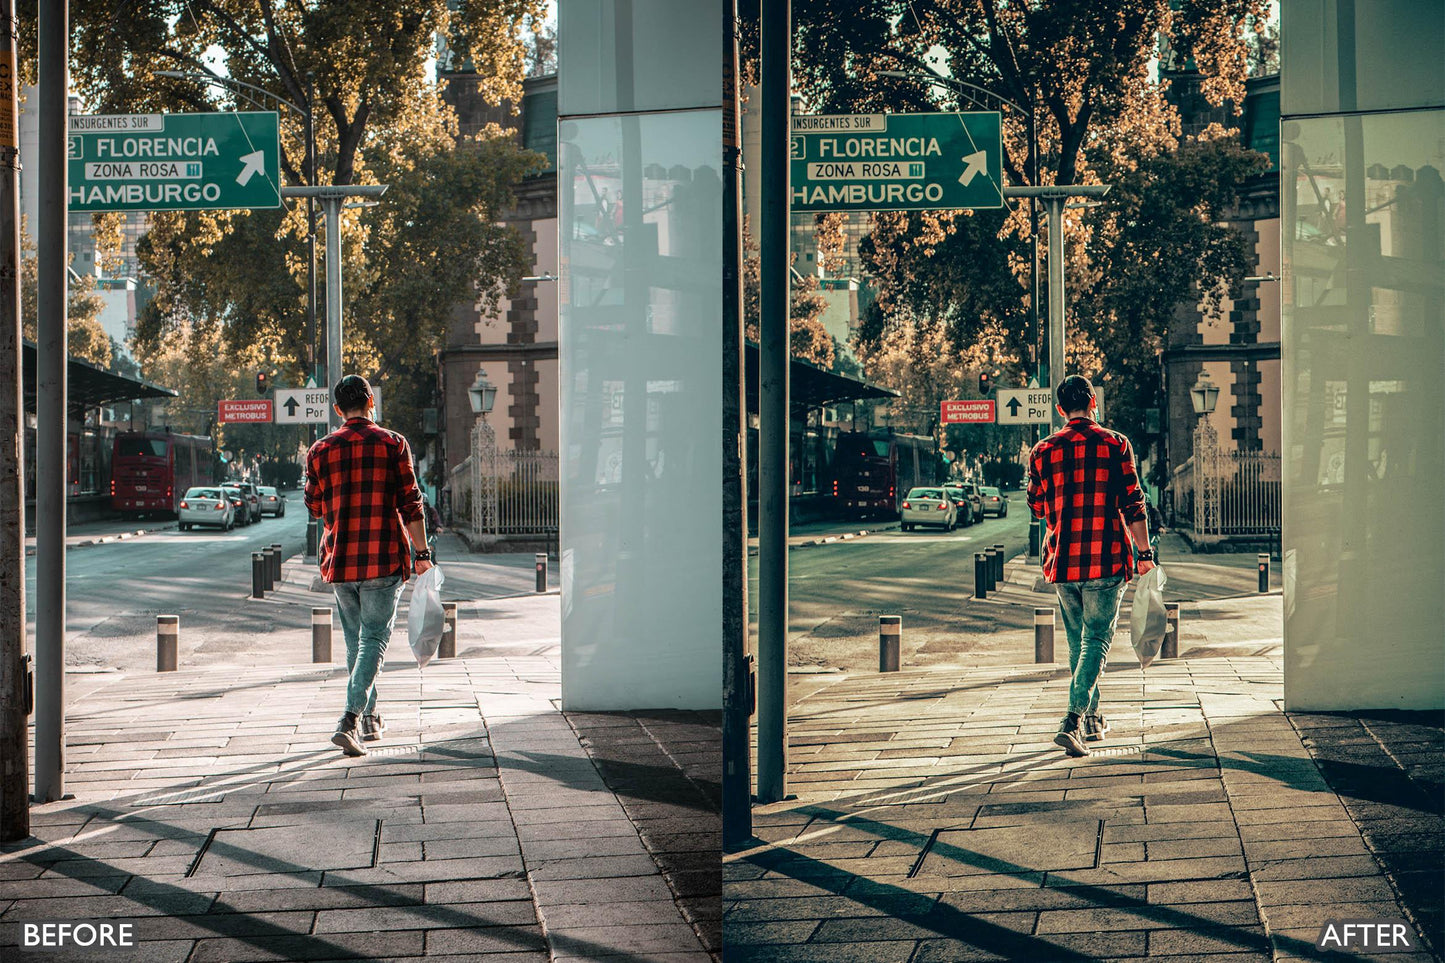 Urban Cinematic Lightroom Presets Pack - adobe lightroom presets, Blogger presets, Cinematic Presets, instagram presets, landscape presets, lightroom presets, moody presets, nude tone presets, Portrait presets, presets before and after, professional lightroom presets, urban presets - aaapresets.com